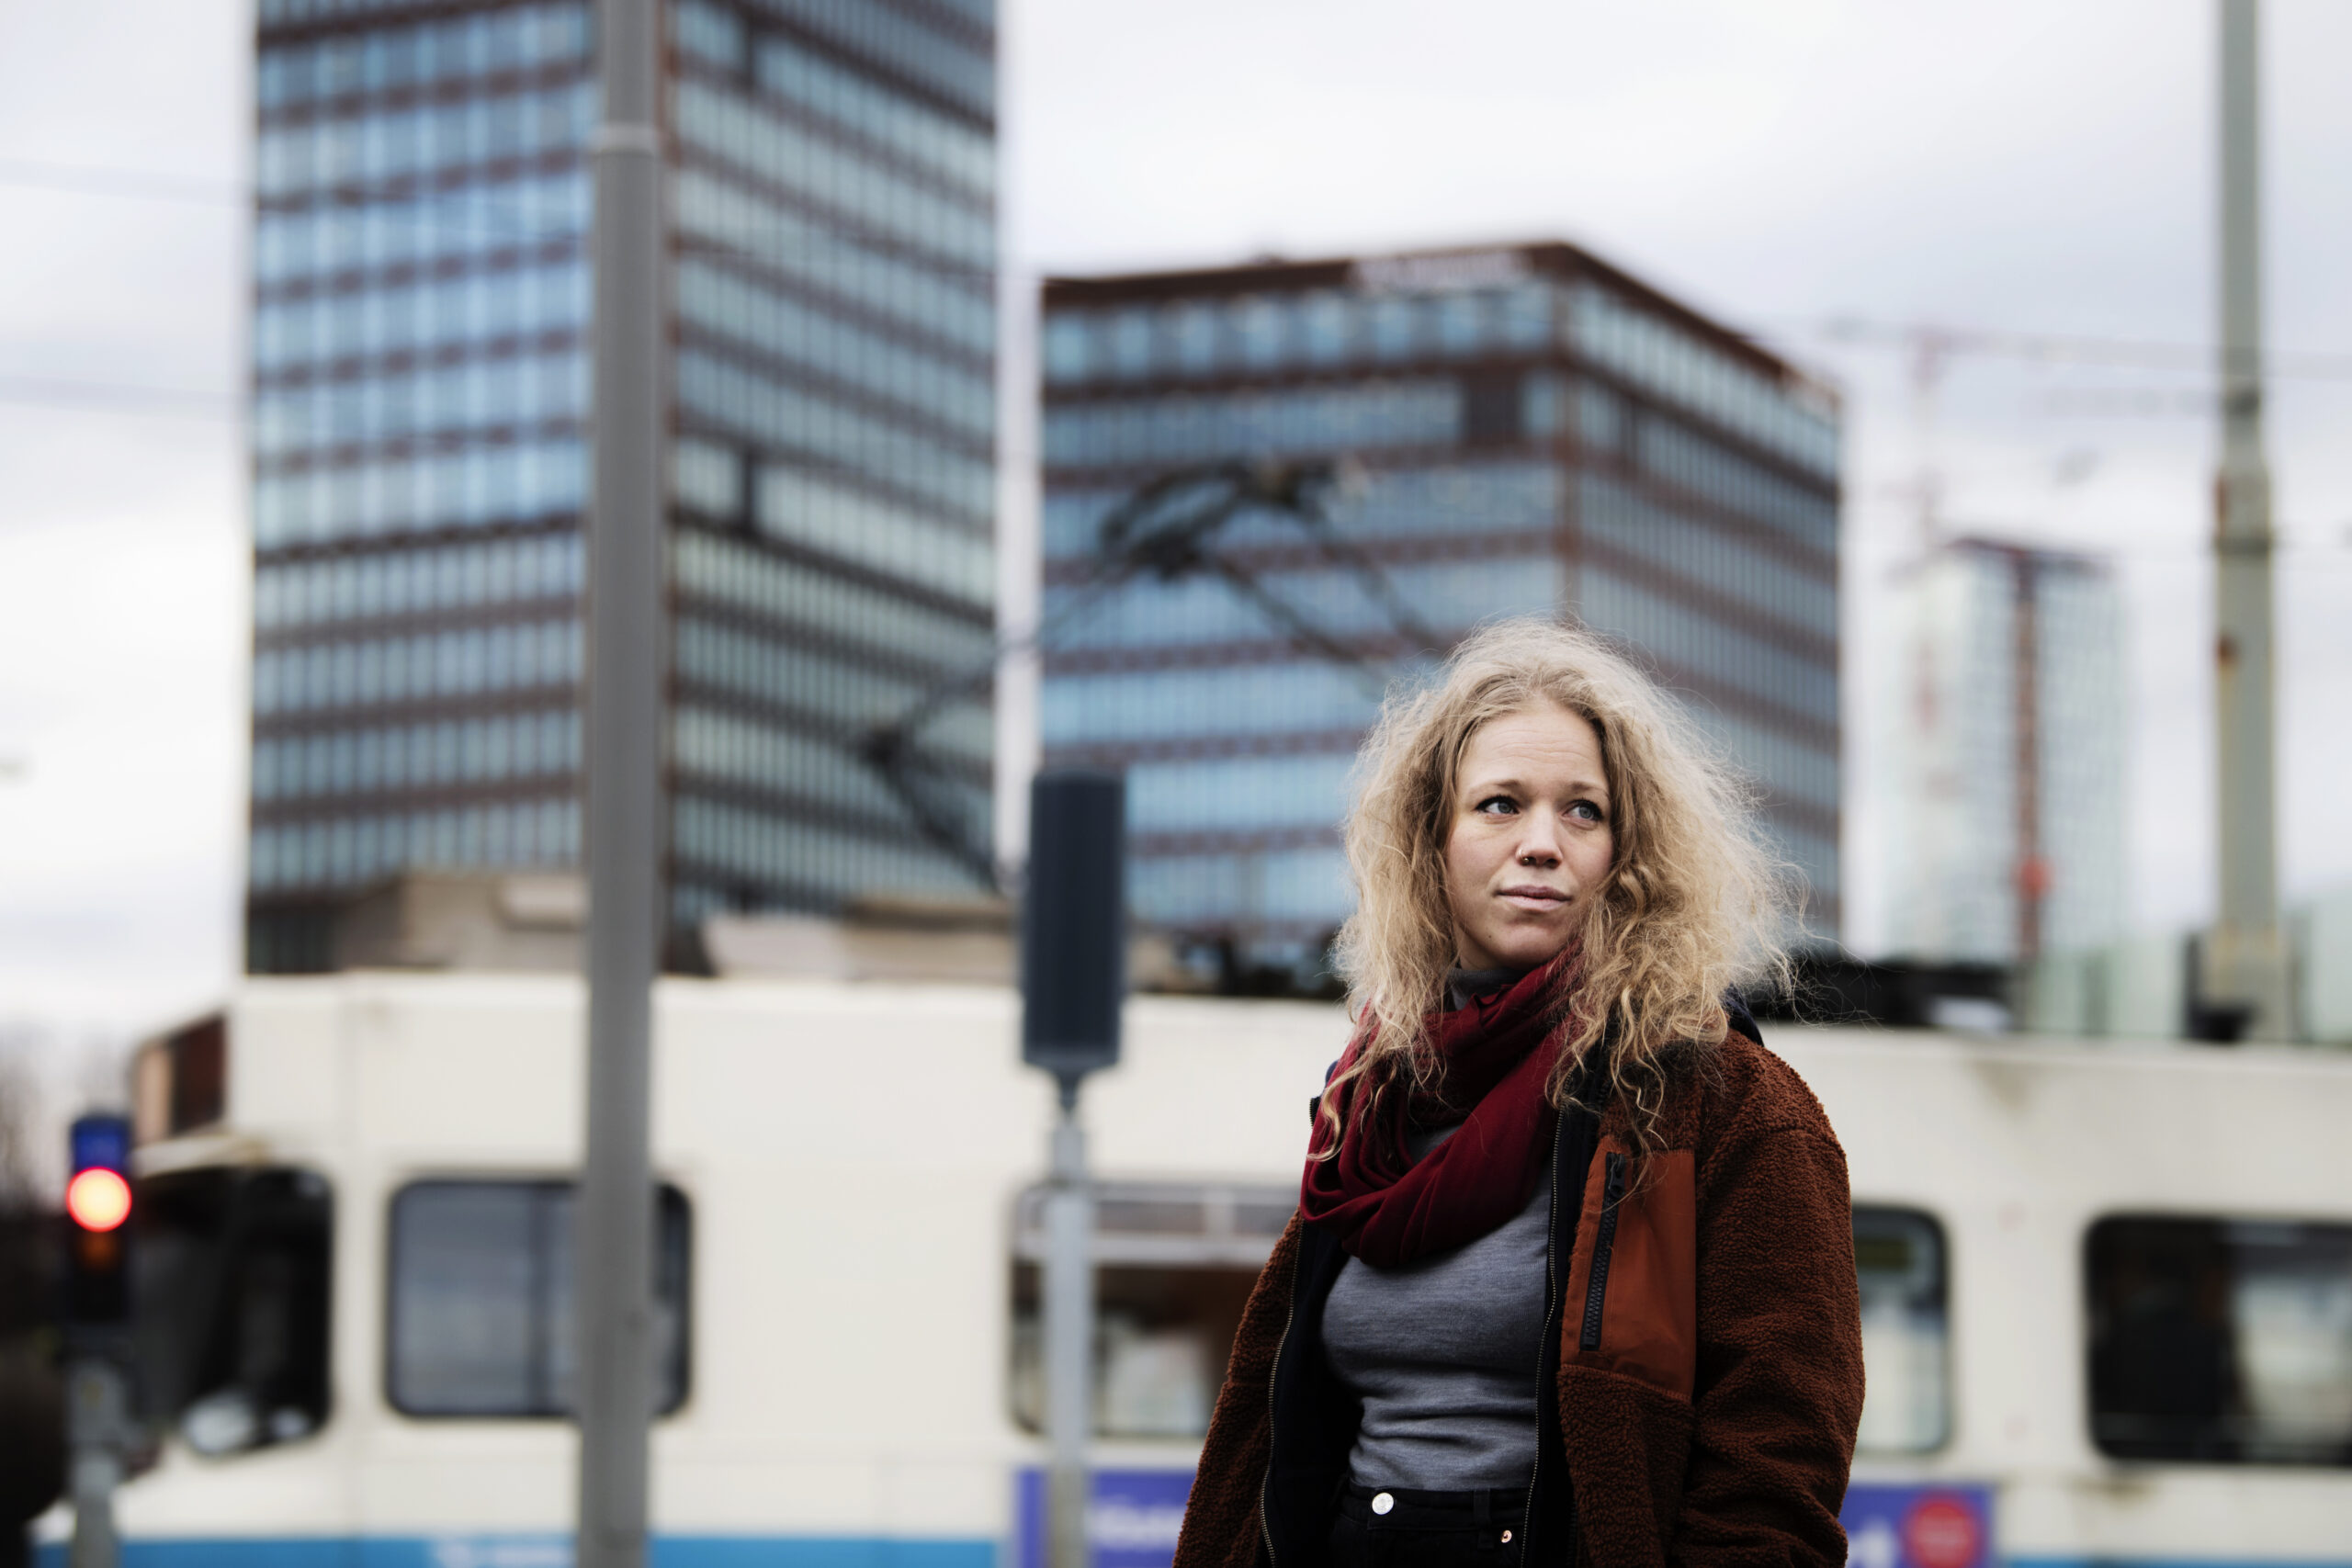 Olivia Bergdahl in front of tower blocks in red scarf